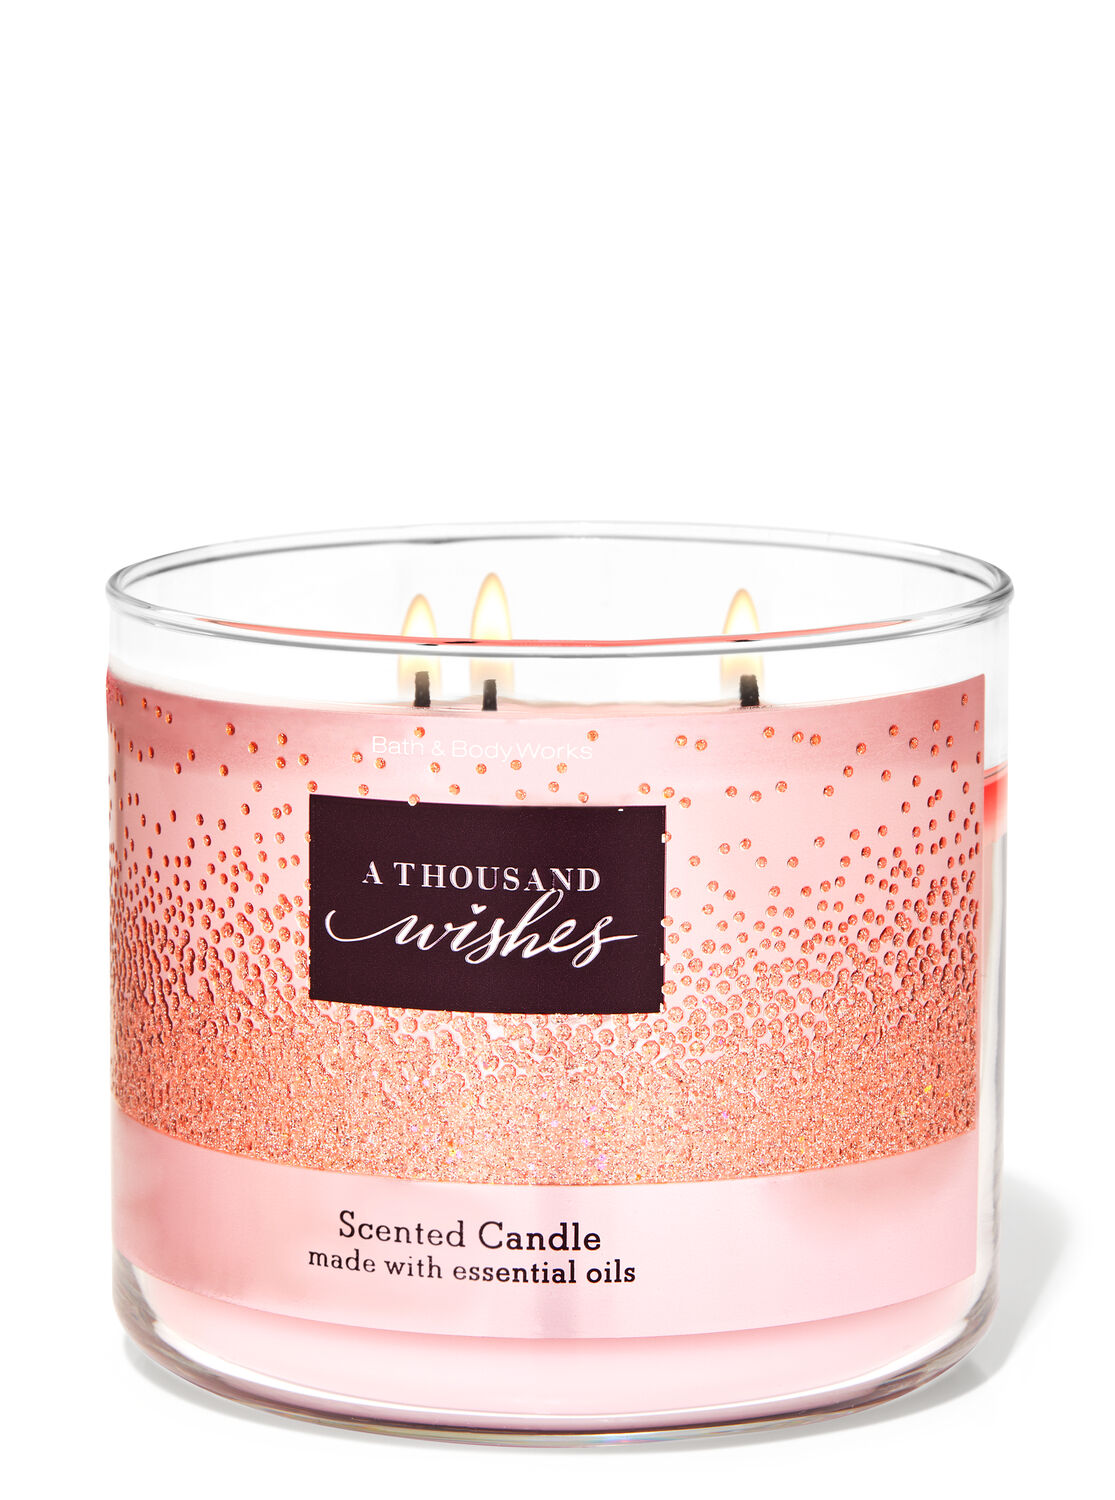 Bath & Body Works A Thousand Wishes 3 Wick Scented Candle 14.5 oz Large 